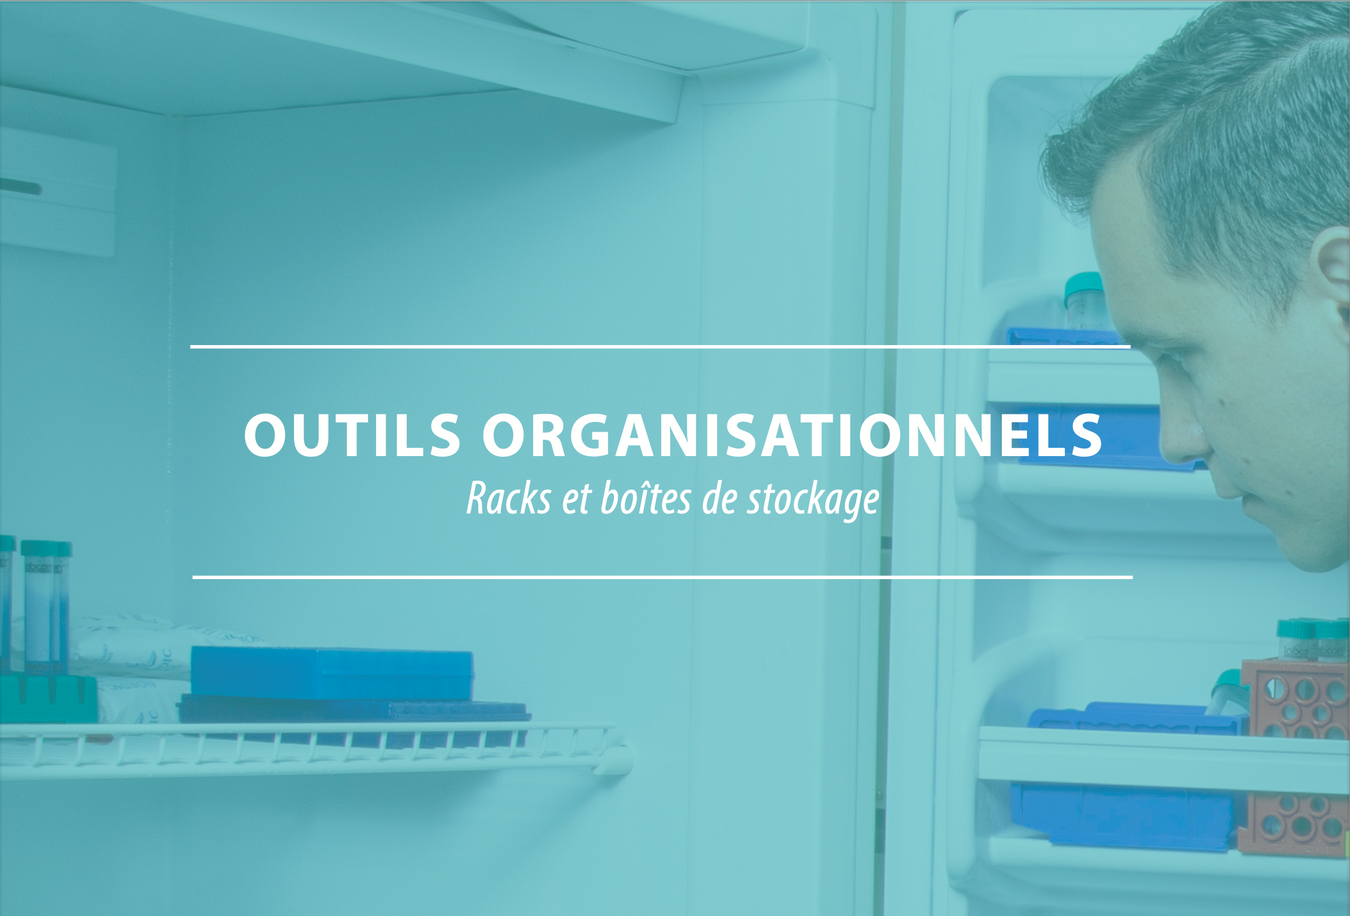 Labcon organization tools for tubes and other consumables